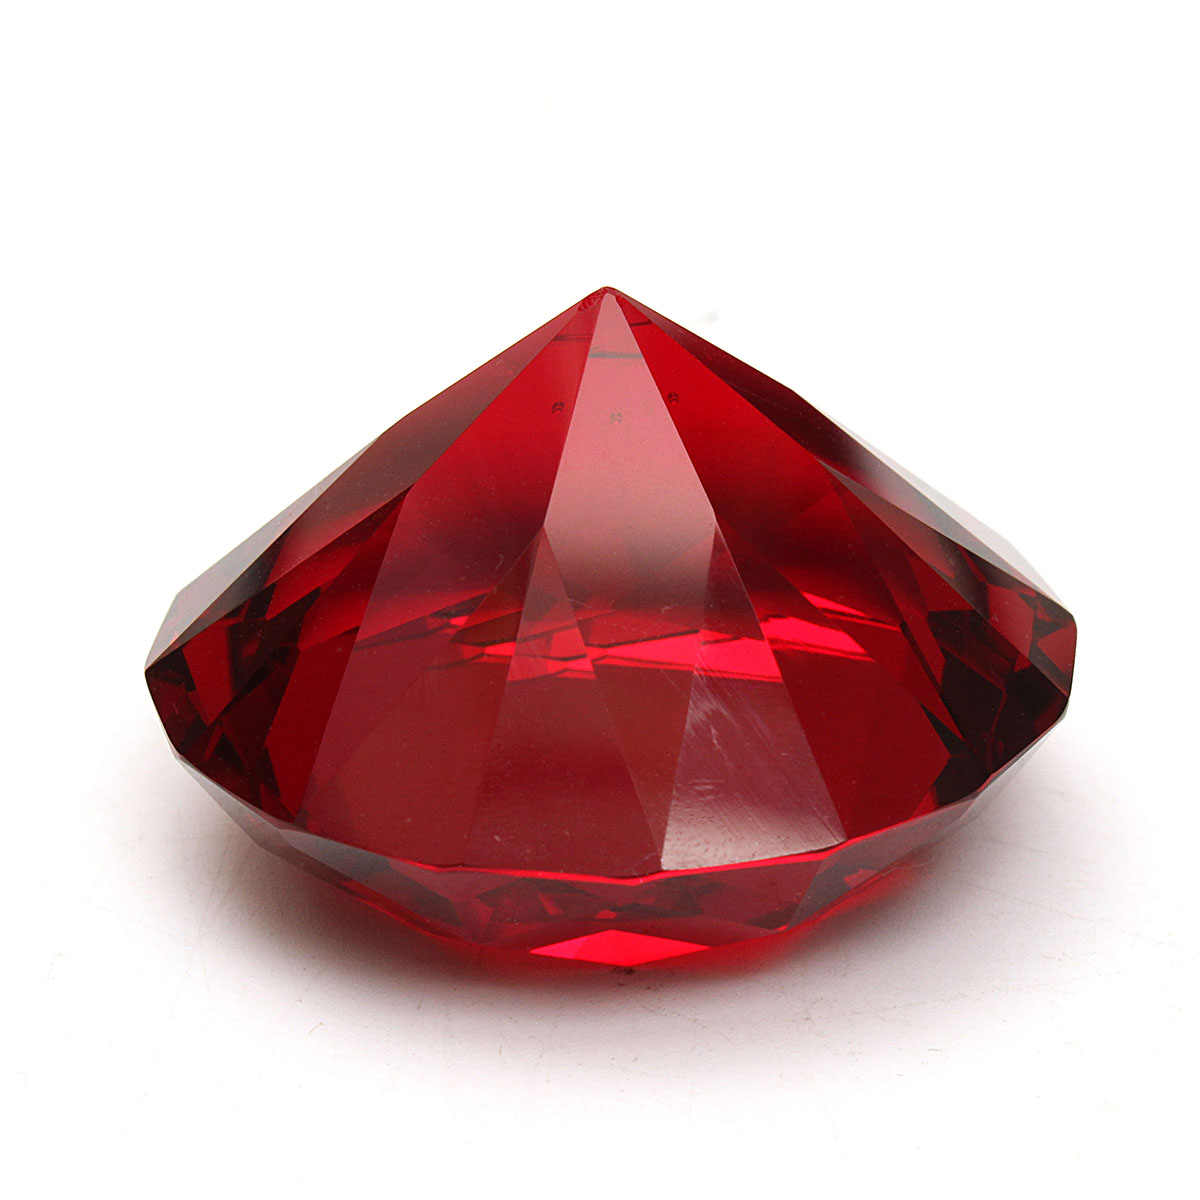 Red-Diamond-Shaped-Crystal-Glass-Art-Paperweight-Wedding-Favors-Shower-Home-Decor-40mm-1451072